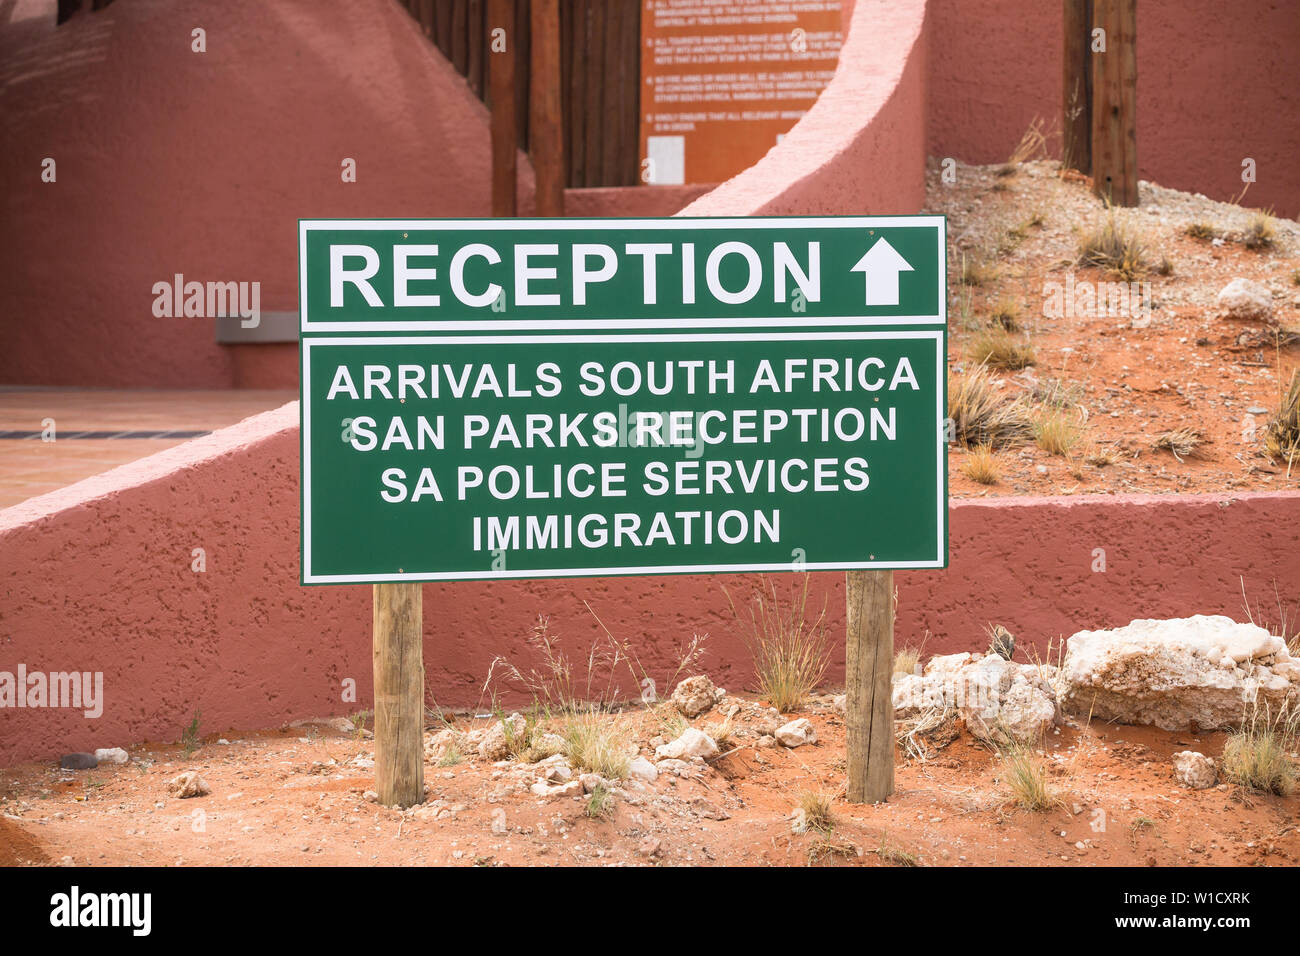 sign board with the words or text Reception arrivals South Africa San Parks reception S A police services immigration at Kgalagadi Transfrontier Park Stock Photo